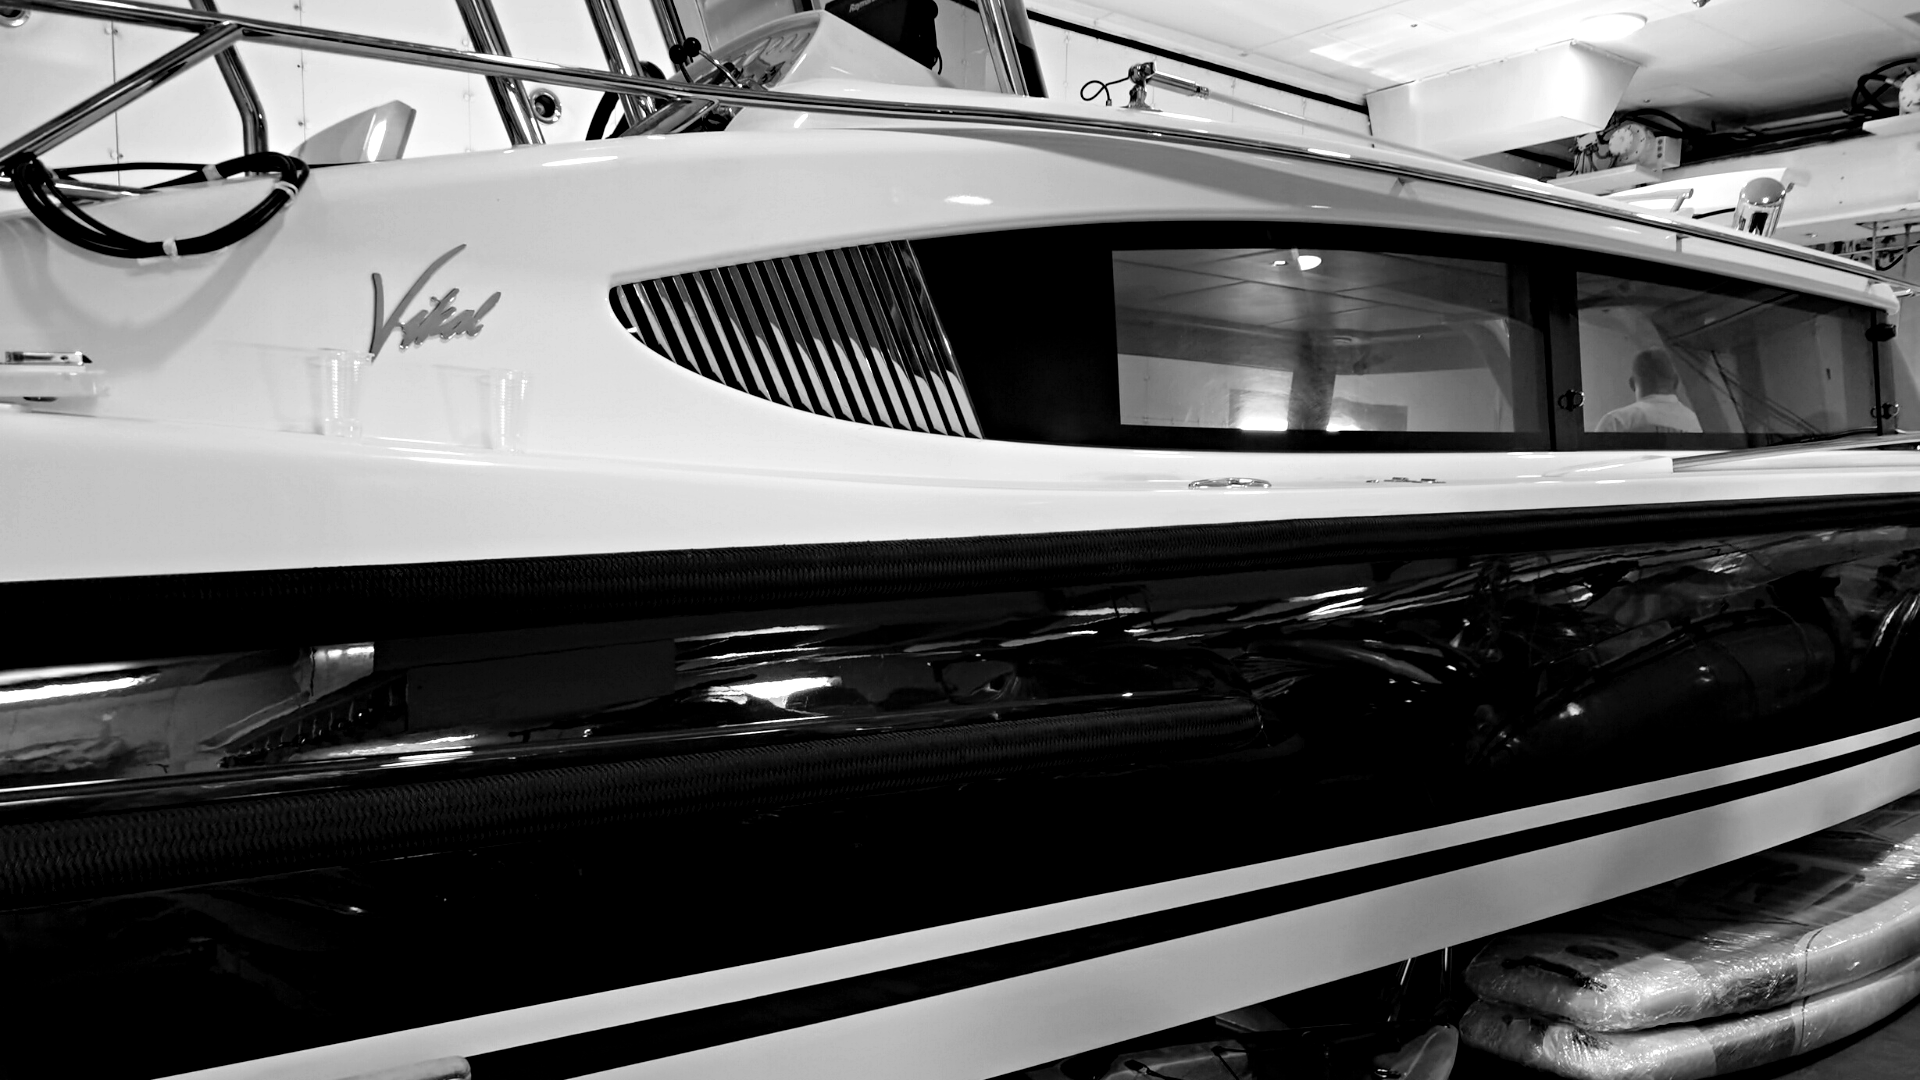 Superyacht tender, Vikal Hybrid Limousine 12M complete reupholstery interior and exterior seating keeping to original design.